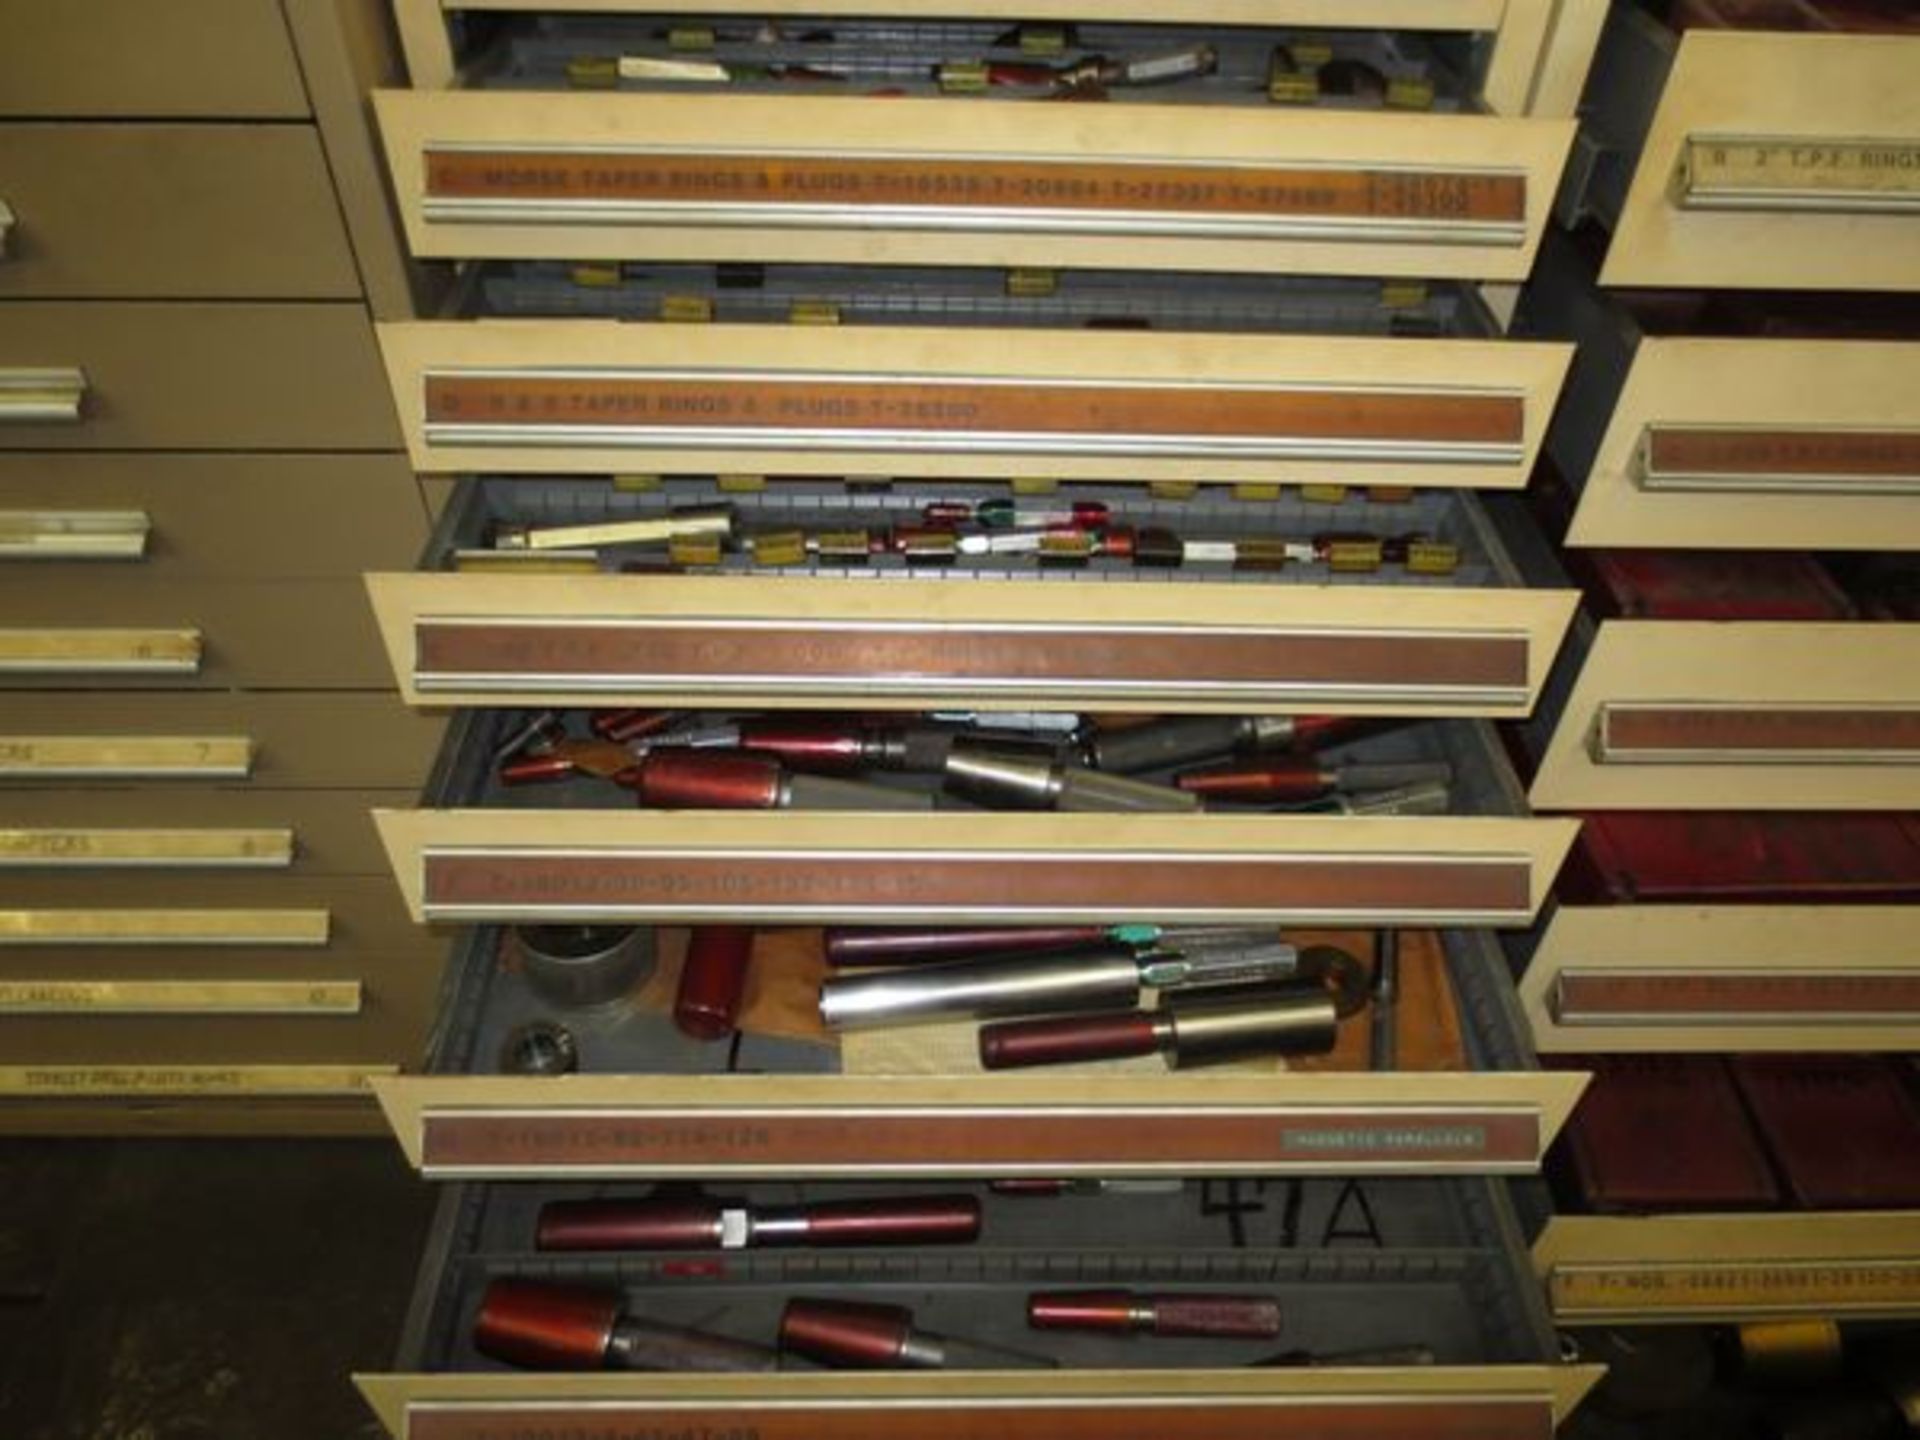 13-DRAWER CABINET W/ARBORS, PLUG GAGES, RING GAGES - Image 2 of 2